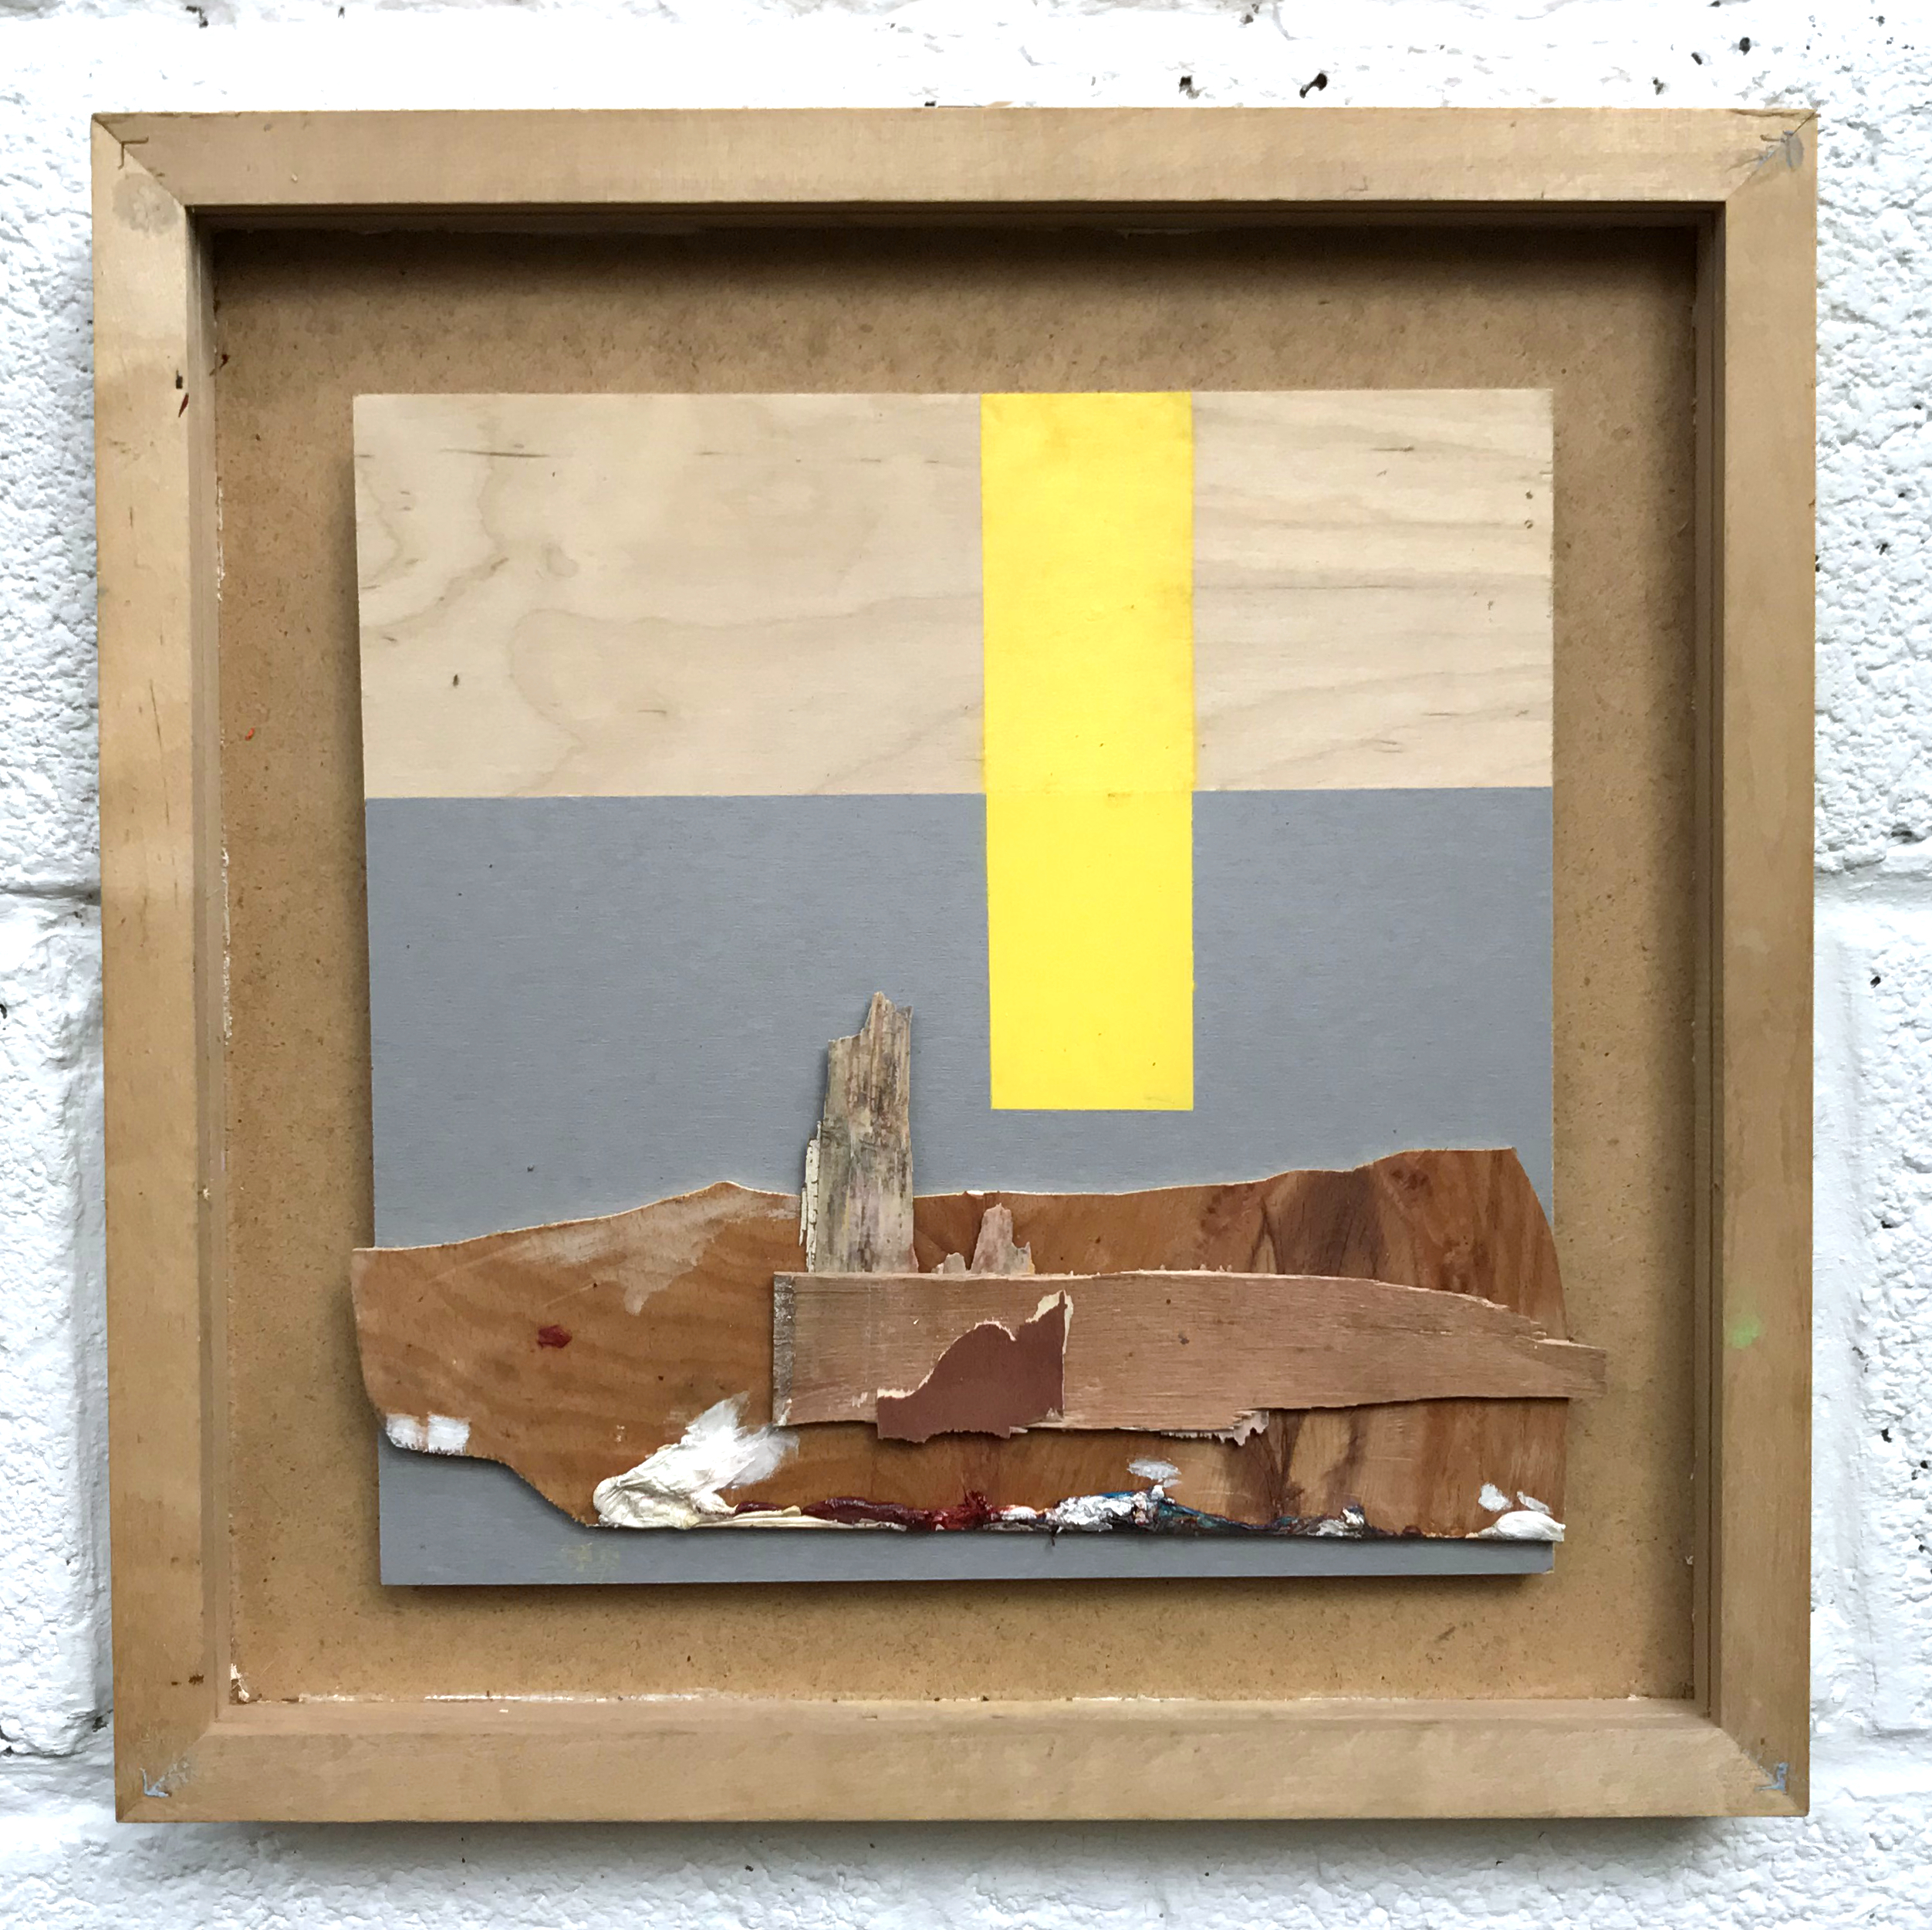 A layered, framed composition Made from wood, paint and plastic